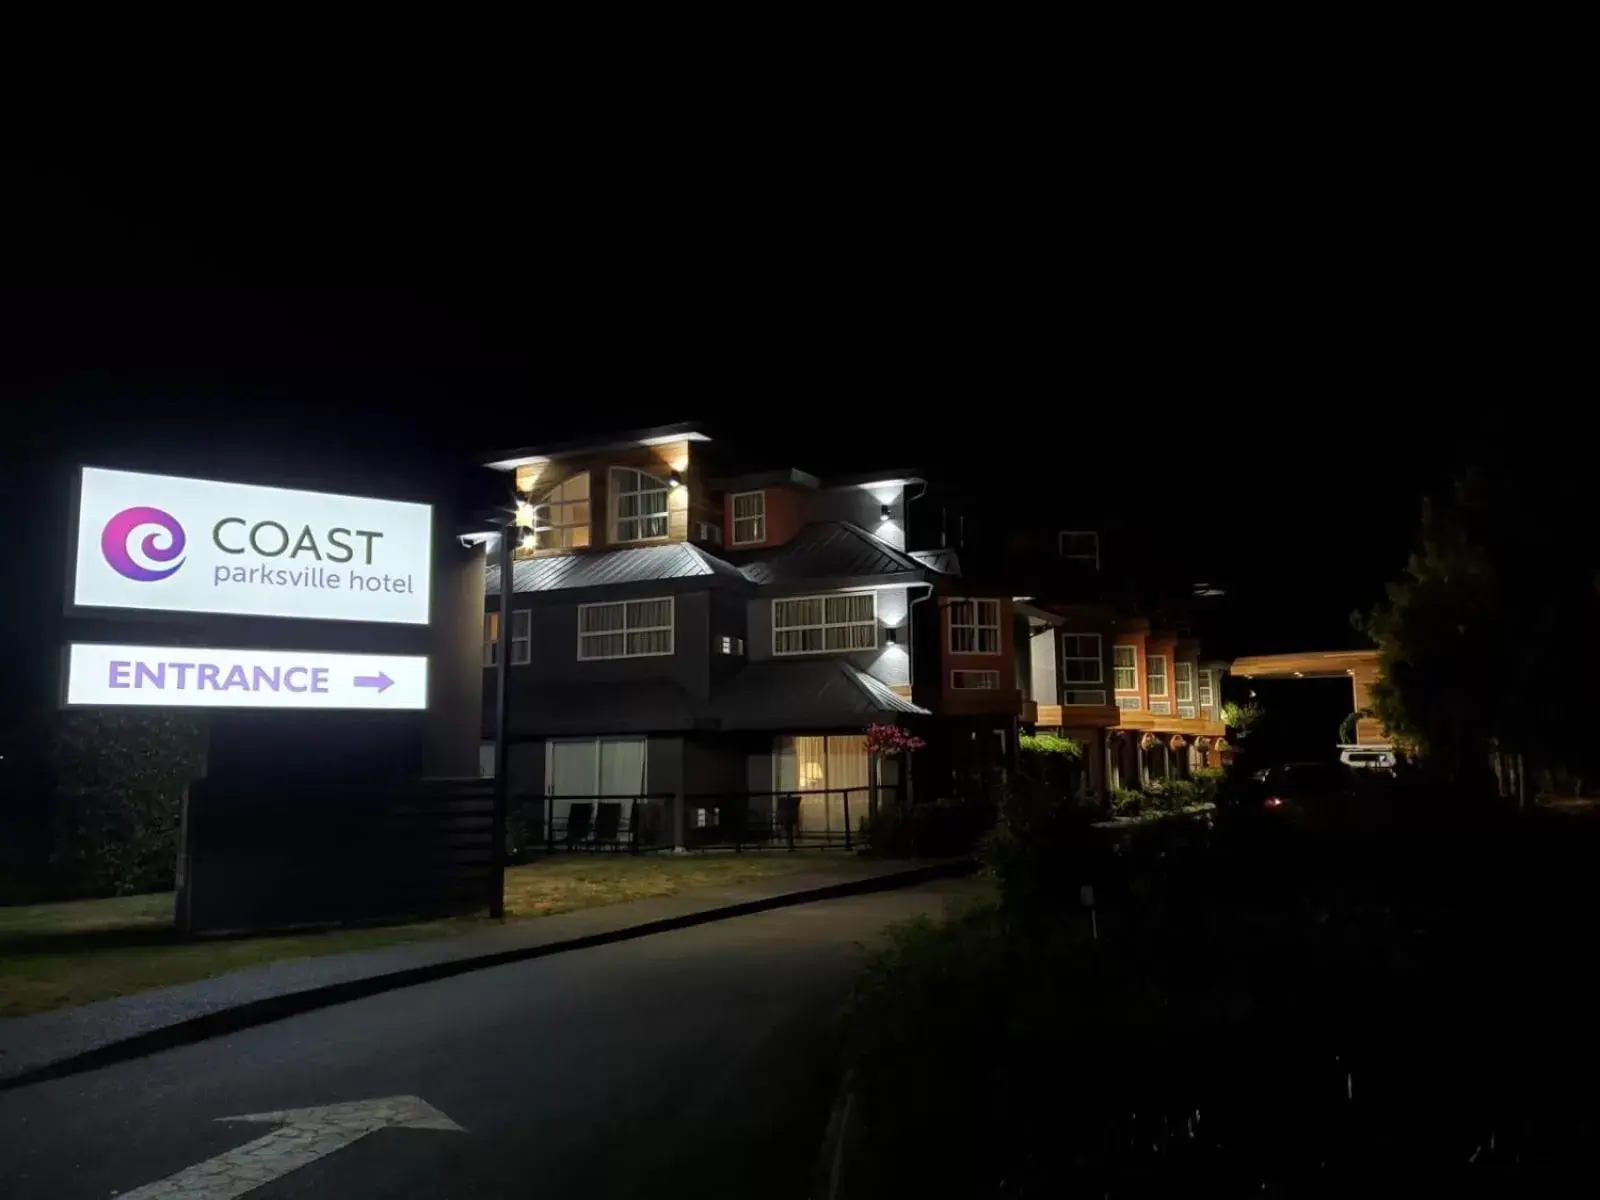 Property Building in Coast Parksville Hotel